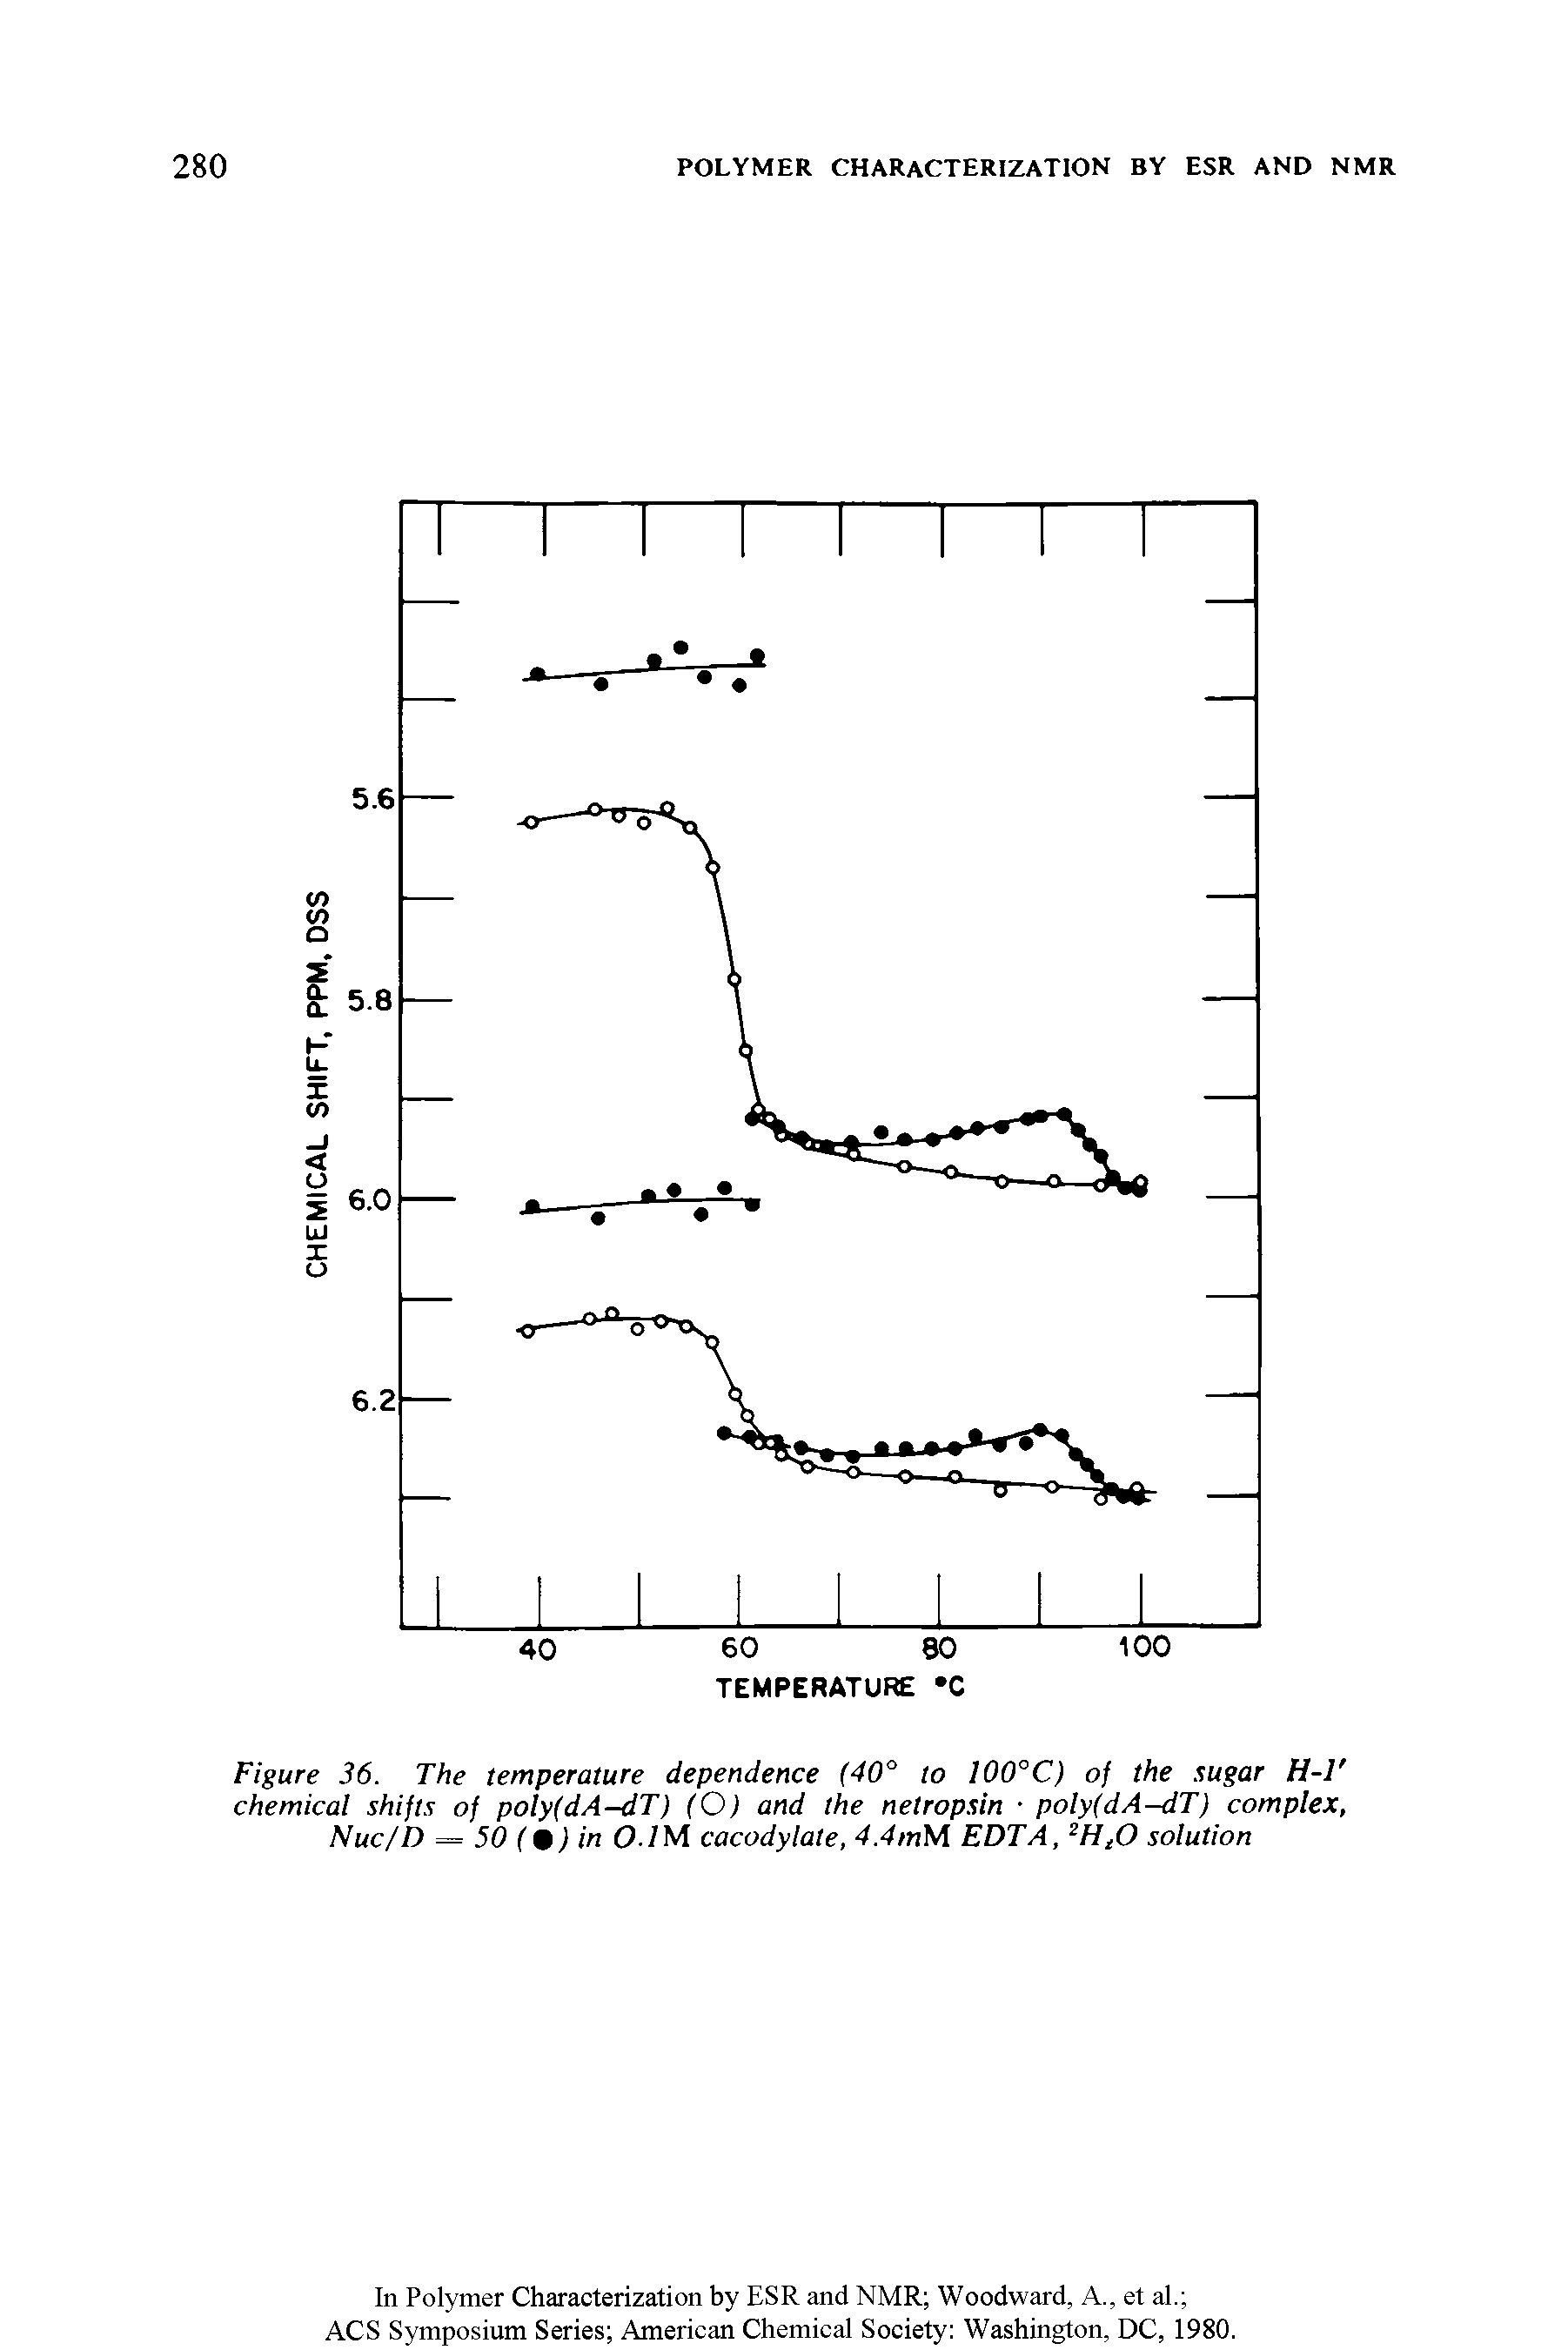 Figure 36. The temperature dependence (40° to 100°C) of the sugar H-l chemical shifts of poly(dA-dT) (O) and the netropsin poly(dA-dT) complex, Nuc/D = 50 (9) in 01M cacodylate, 4.4mM EDTA, 2HlO solution...